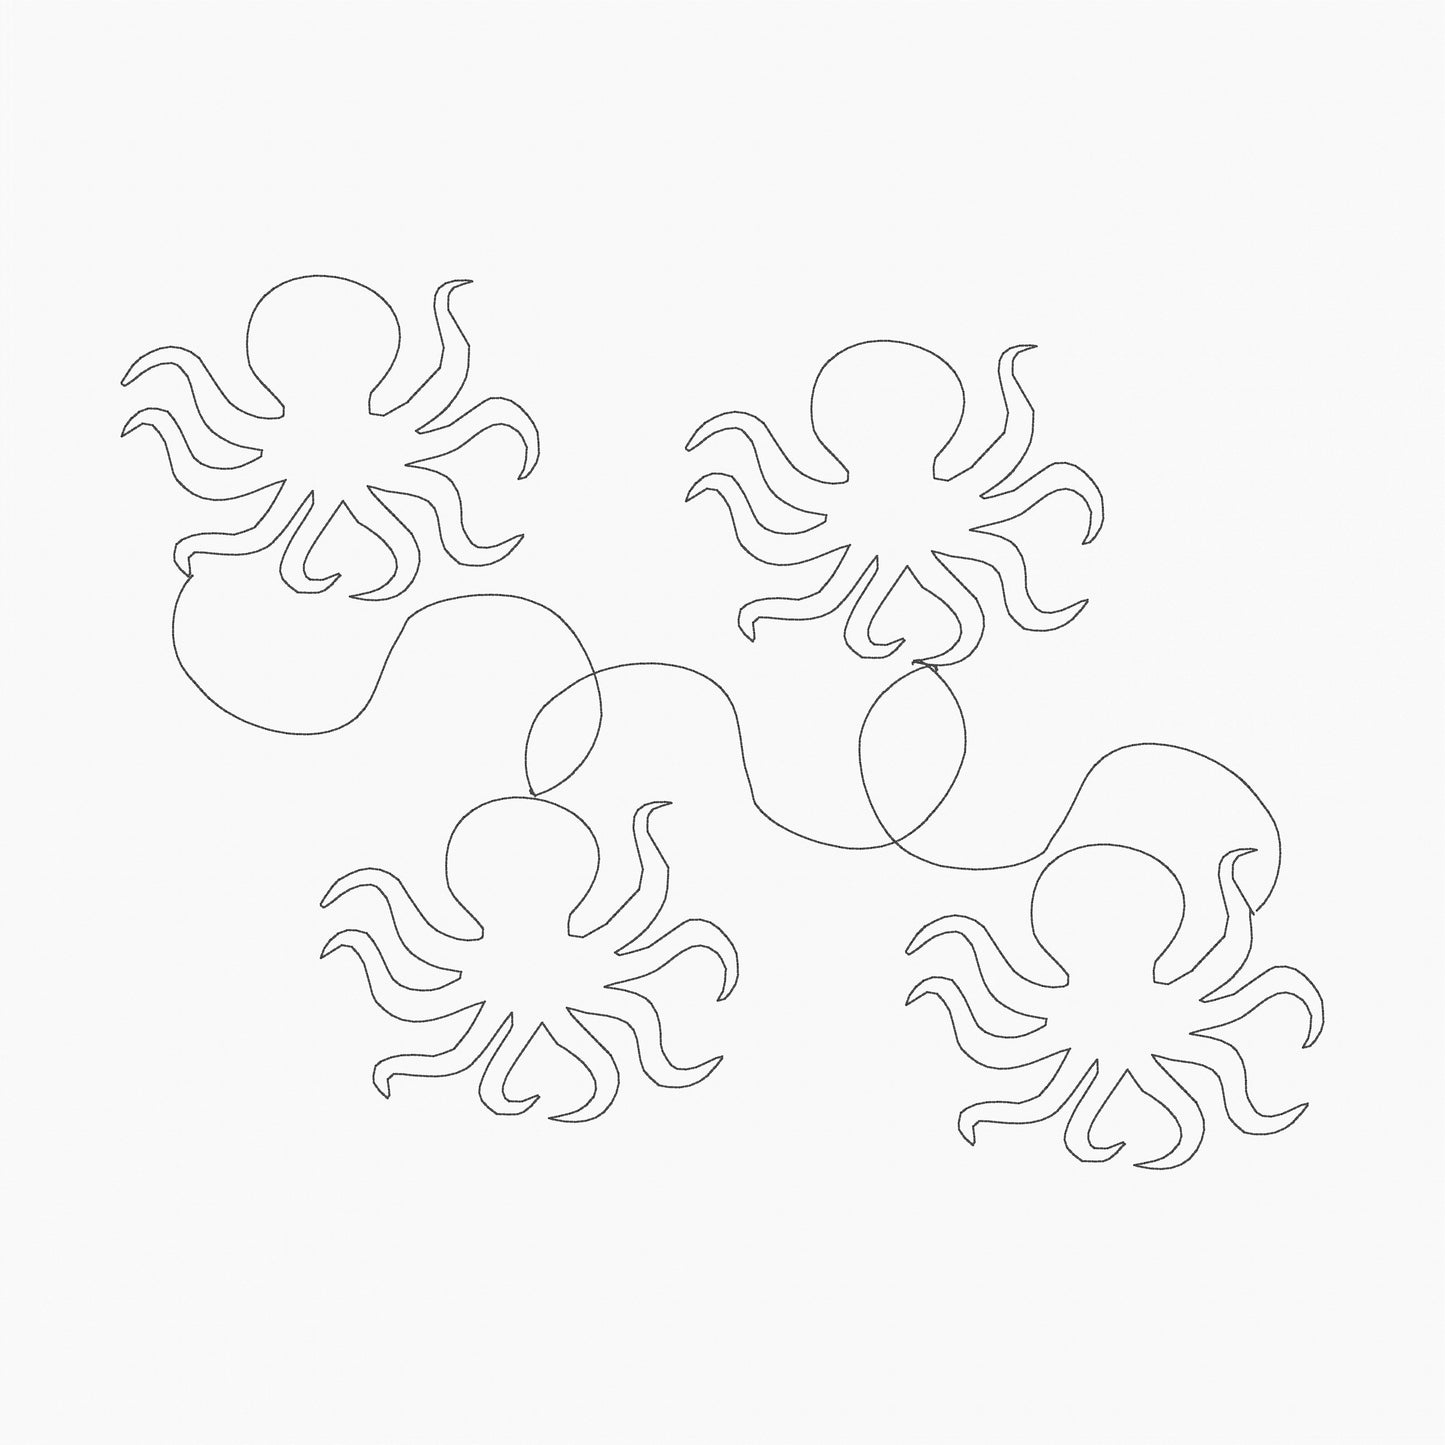 Octopus - In-the-Hoop Quilting Design - 2 Sizes